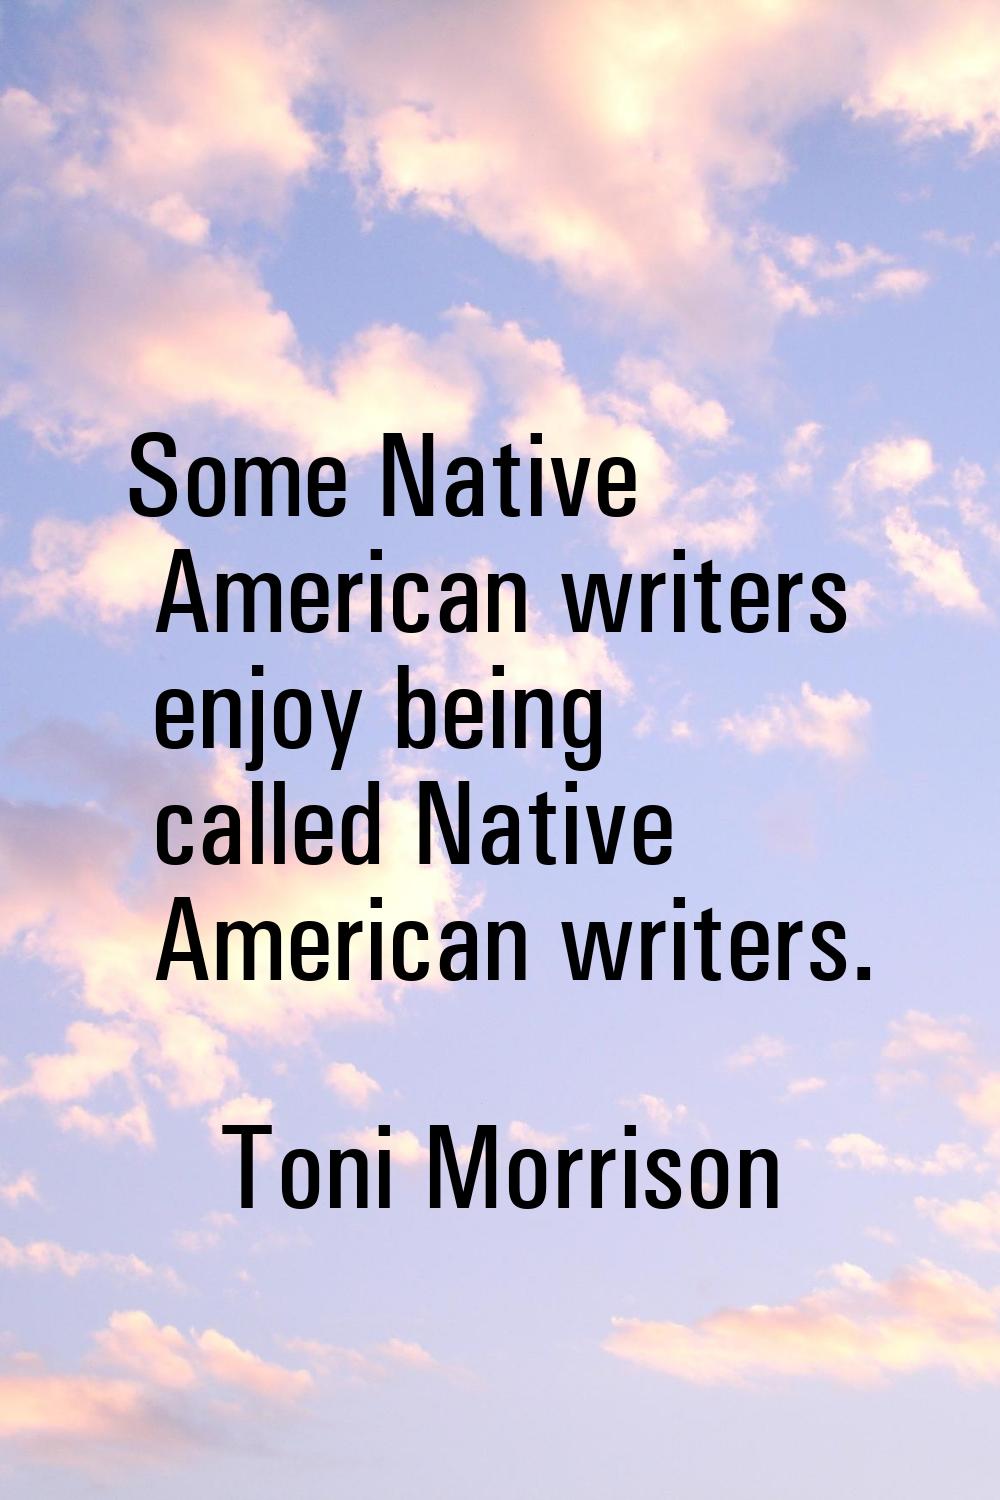 Some Native American writers enjoy being called Native American writers.